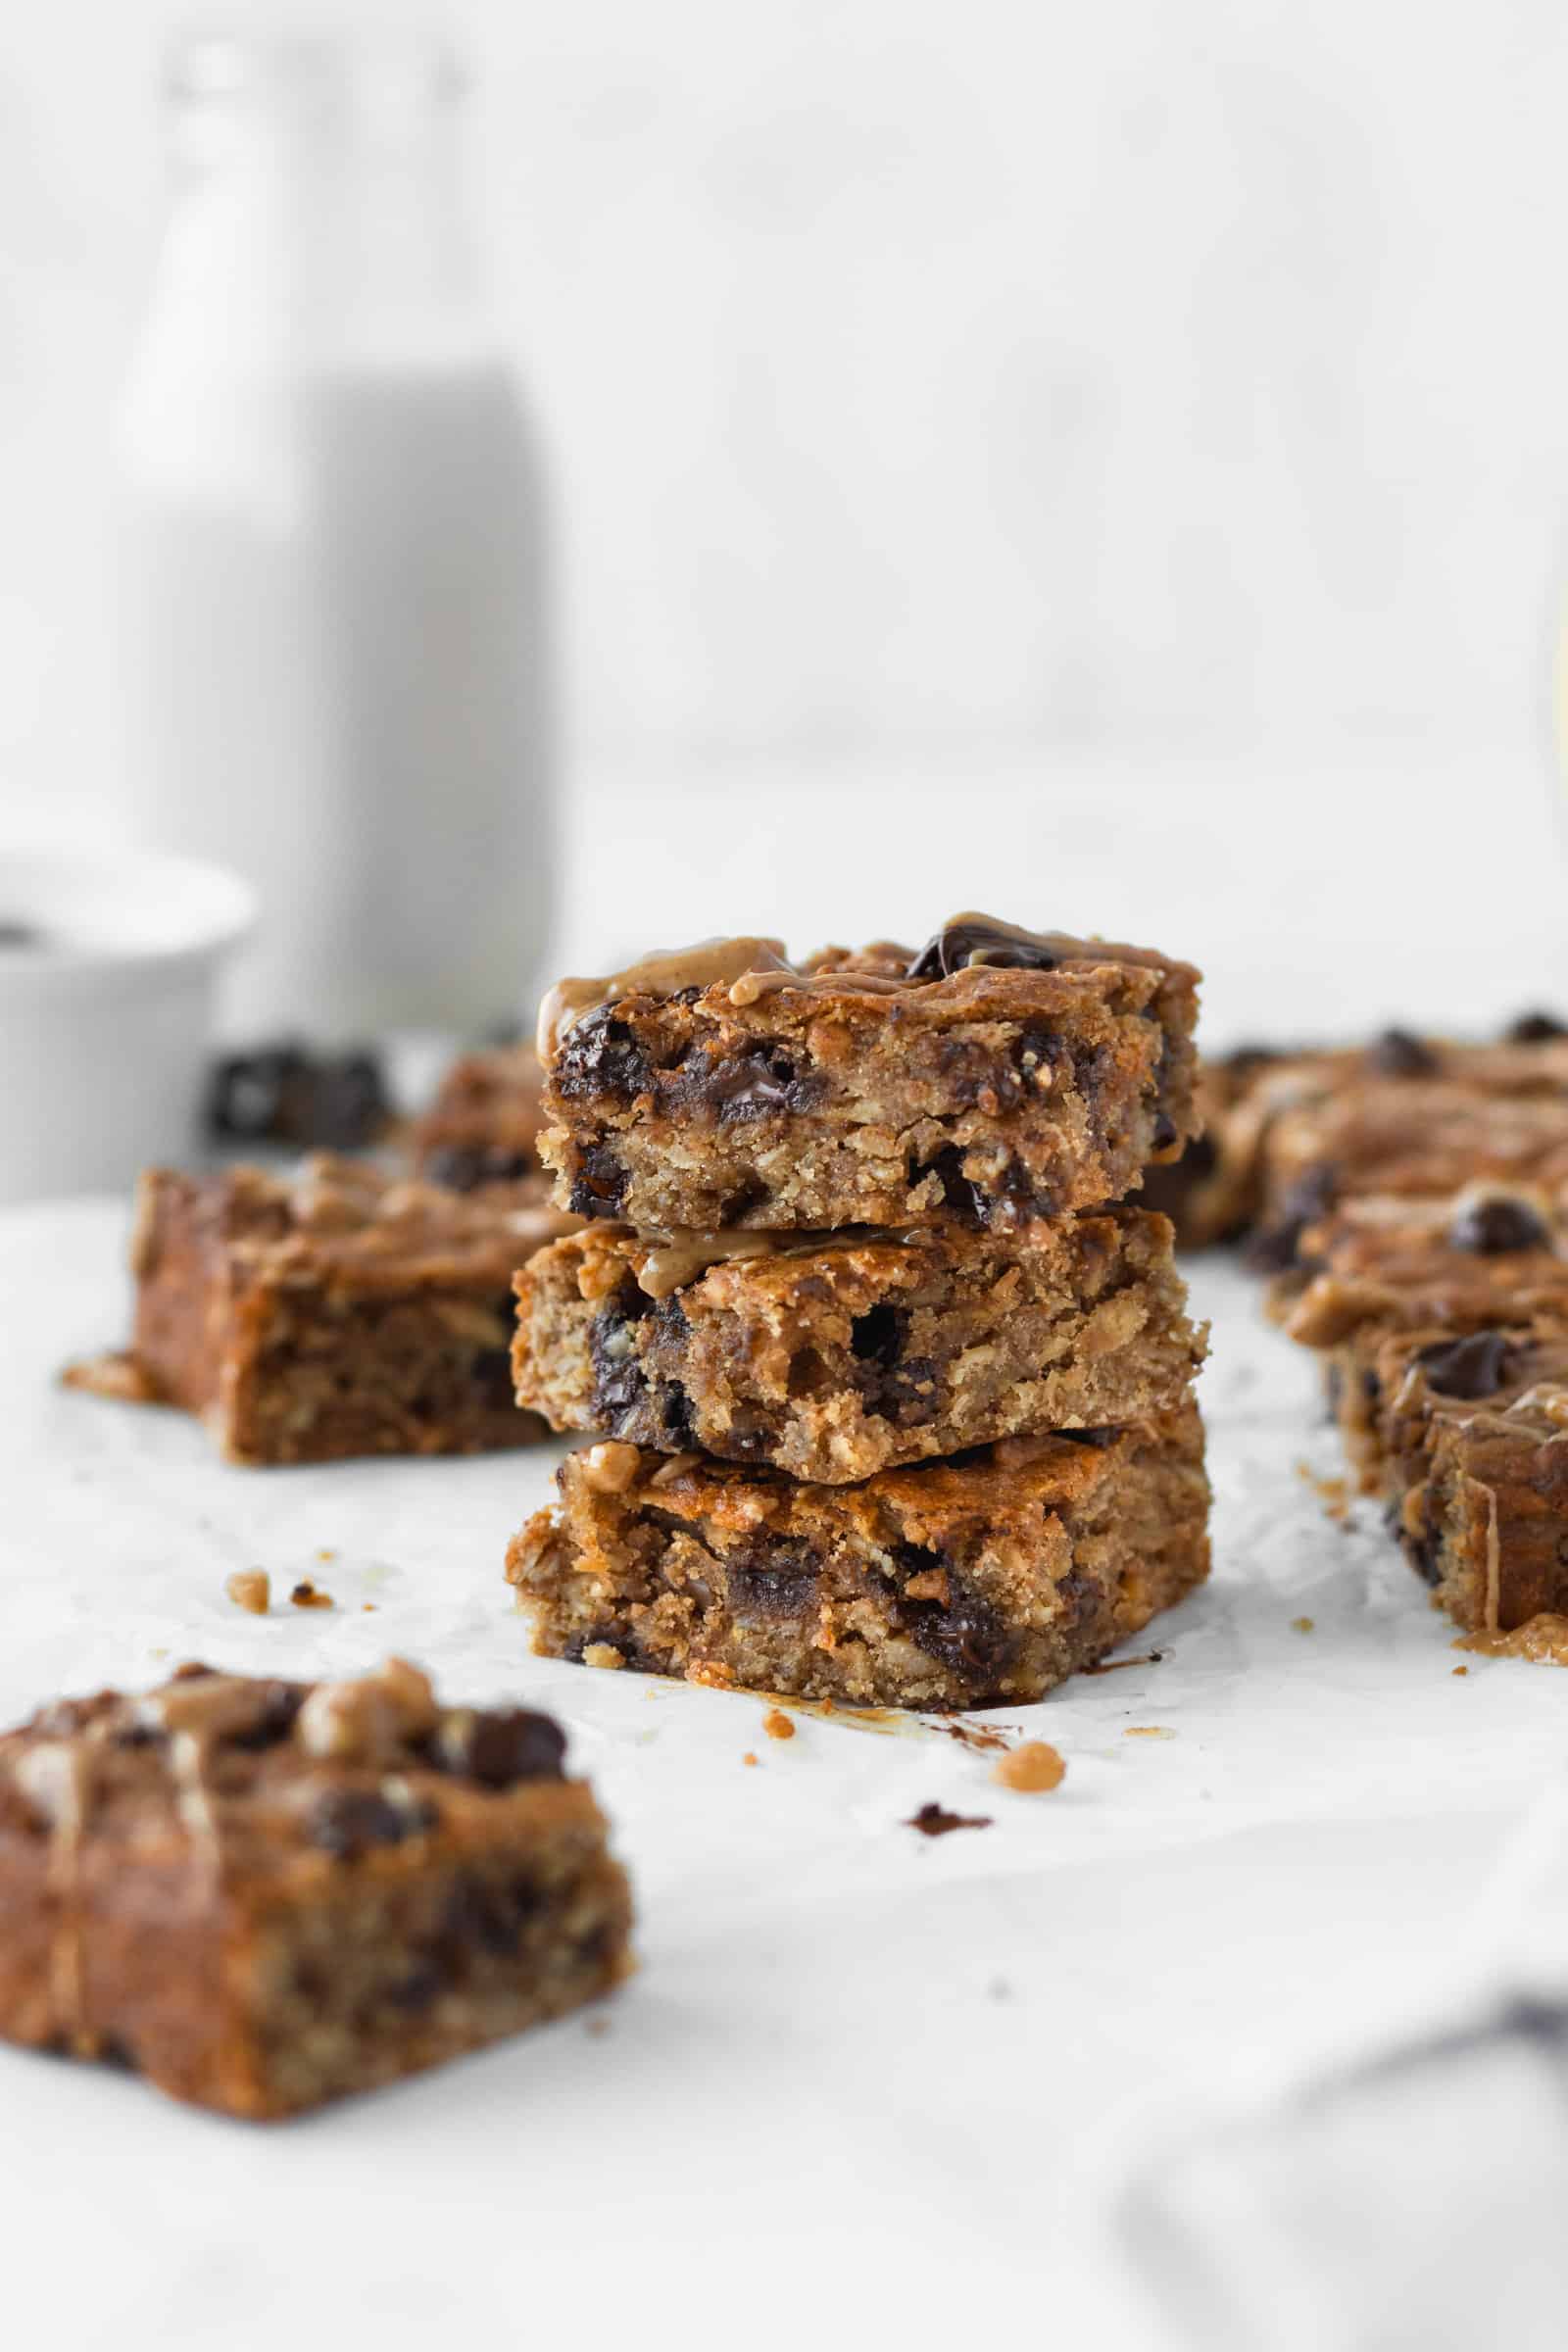 Stack of banana oat bars with chocolate chips